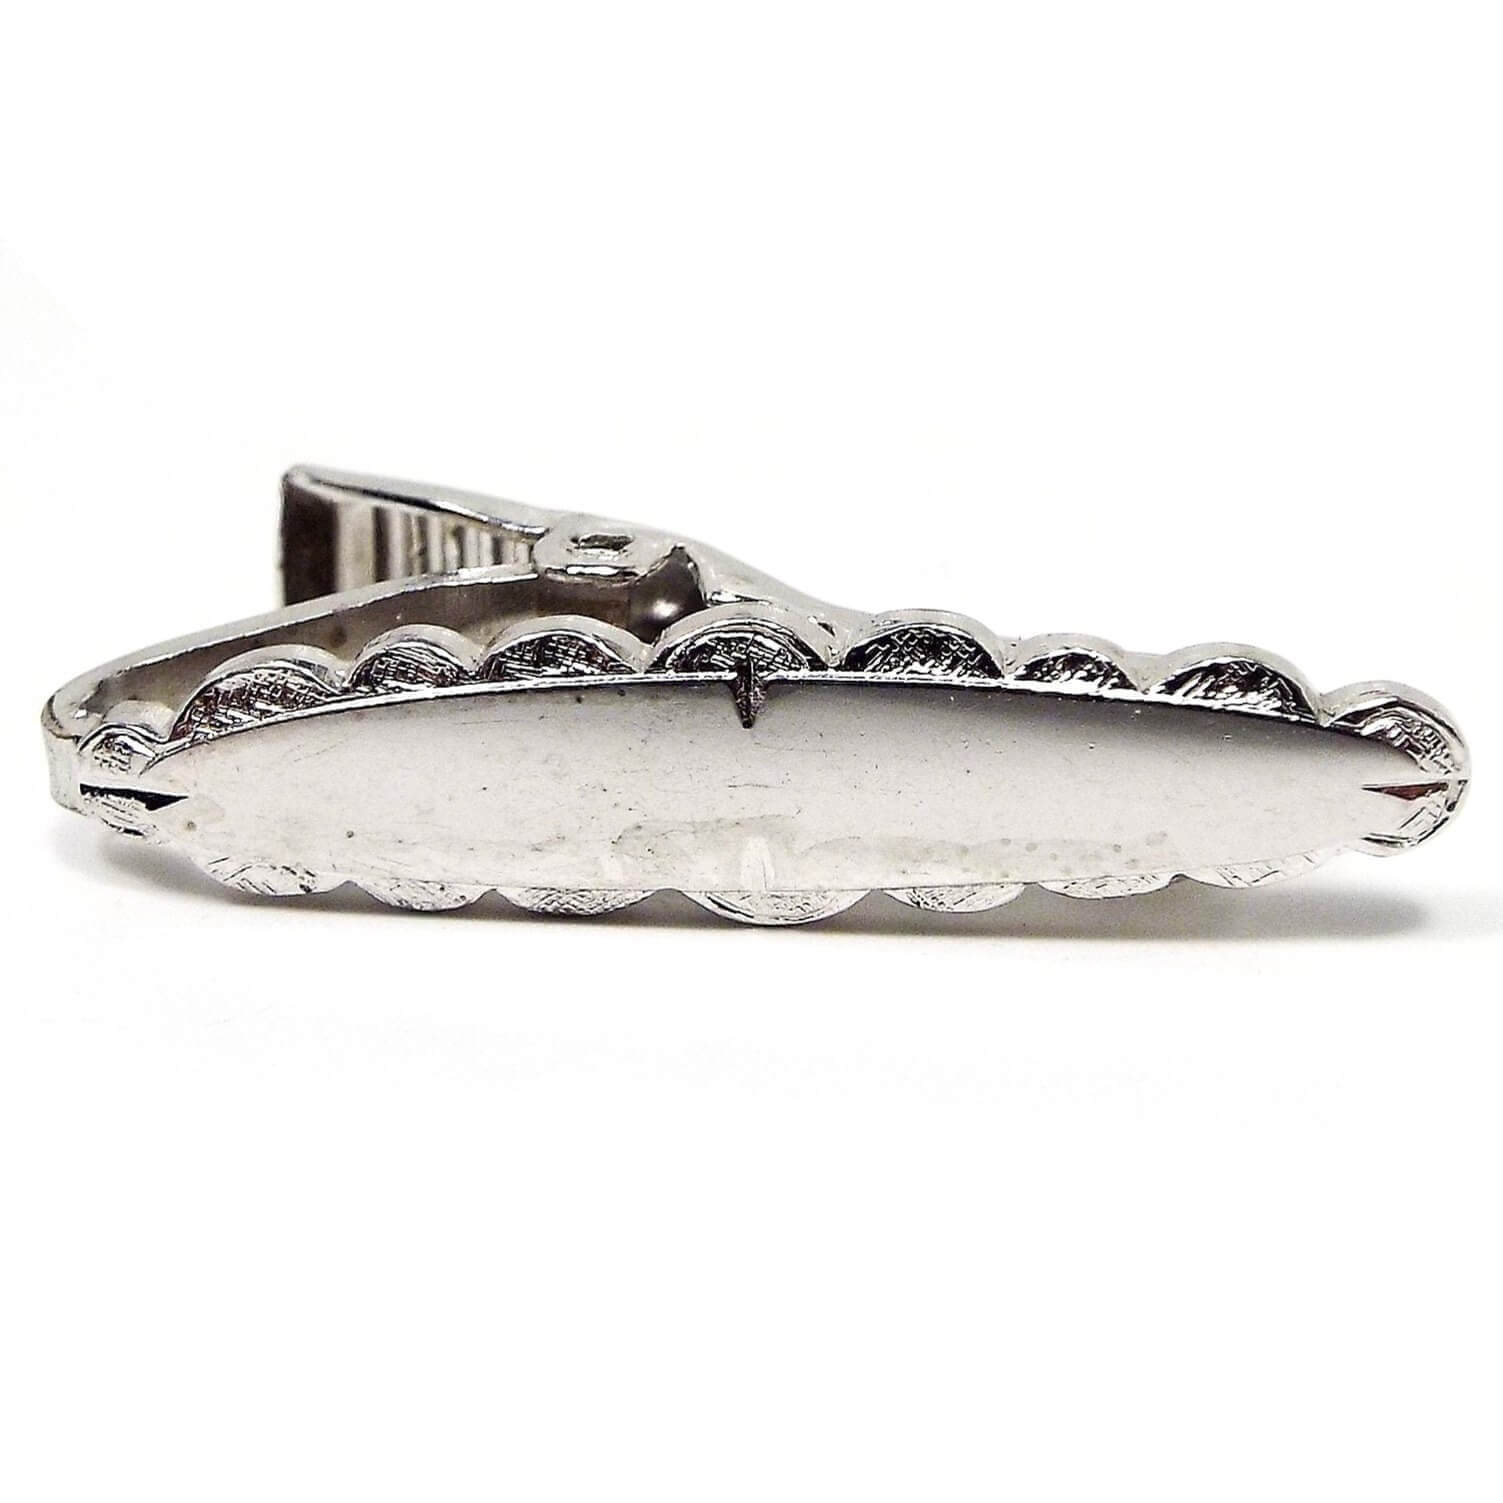 Front view of the retro vintage small tie clip. It is silver tone in color and oval shaped like a long surfboard. It has a textured scalloped shape all the way around the edge. 